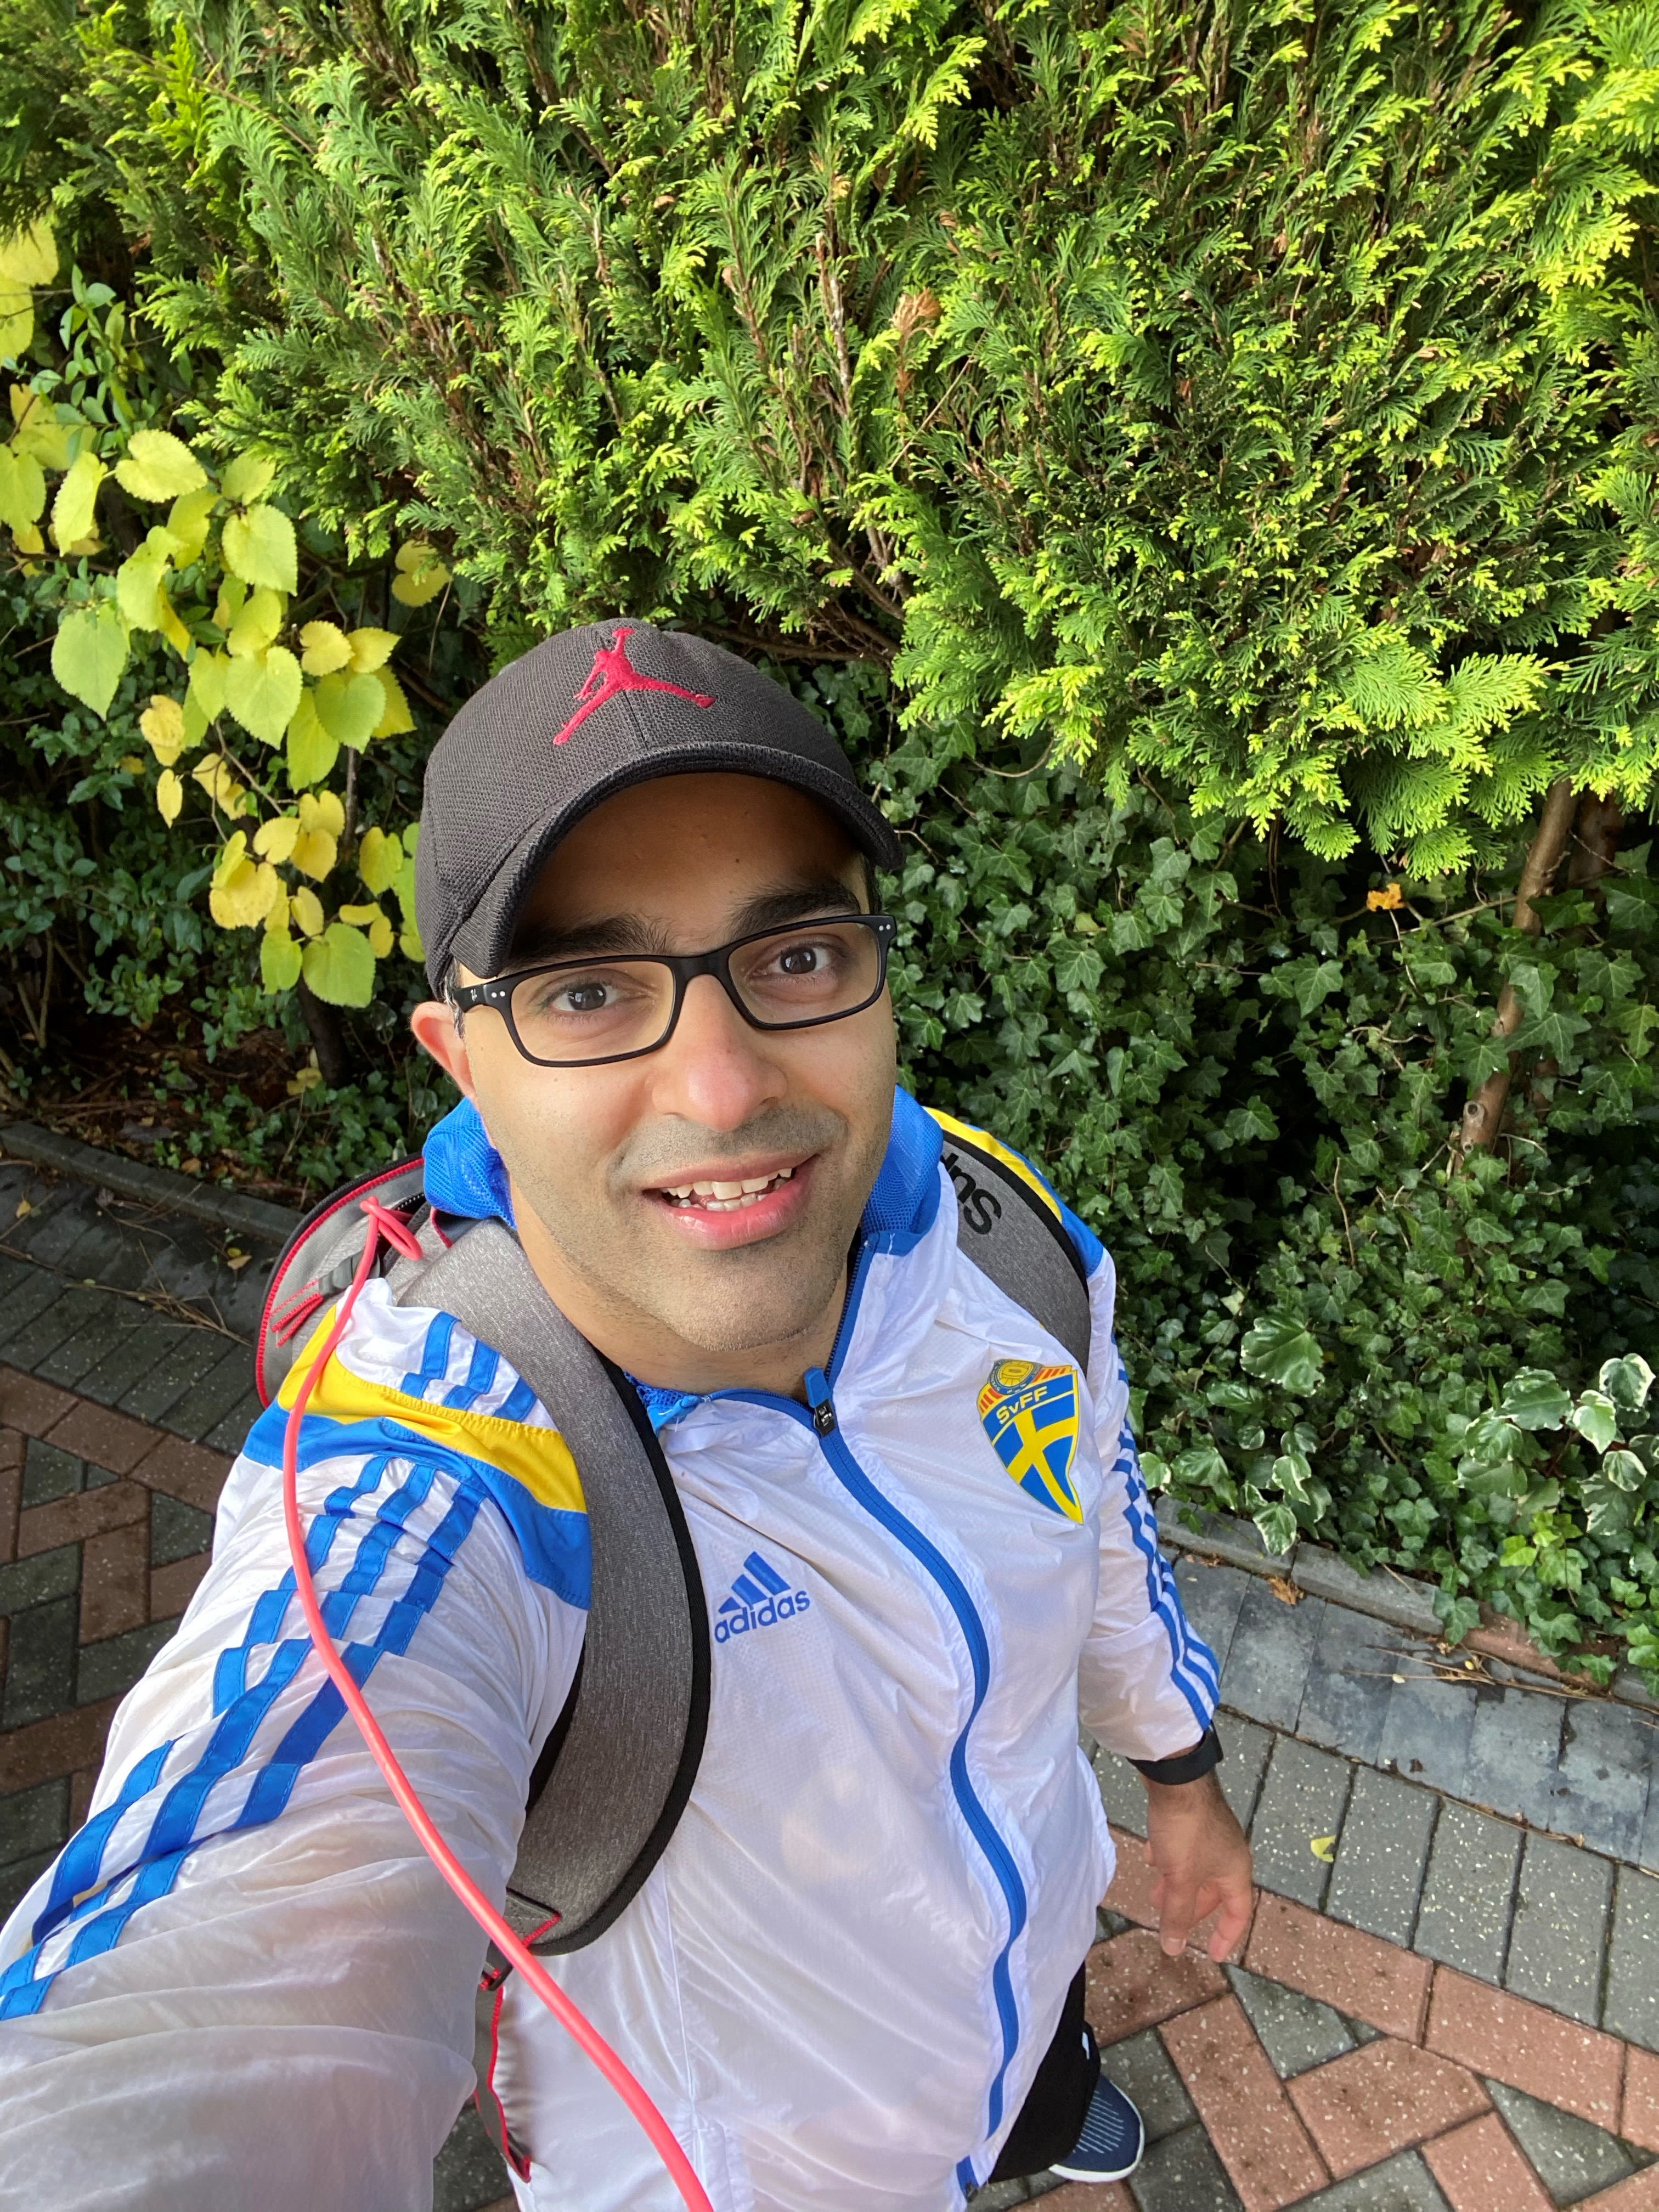 Thirty-seven-year-old Haider Ali, a GP from Manchester, completed his virtual London Marathon by walking the majority of his route to show anyone is capable of finishing the 26.2 miles